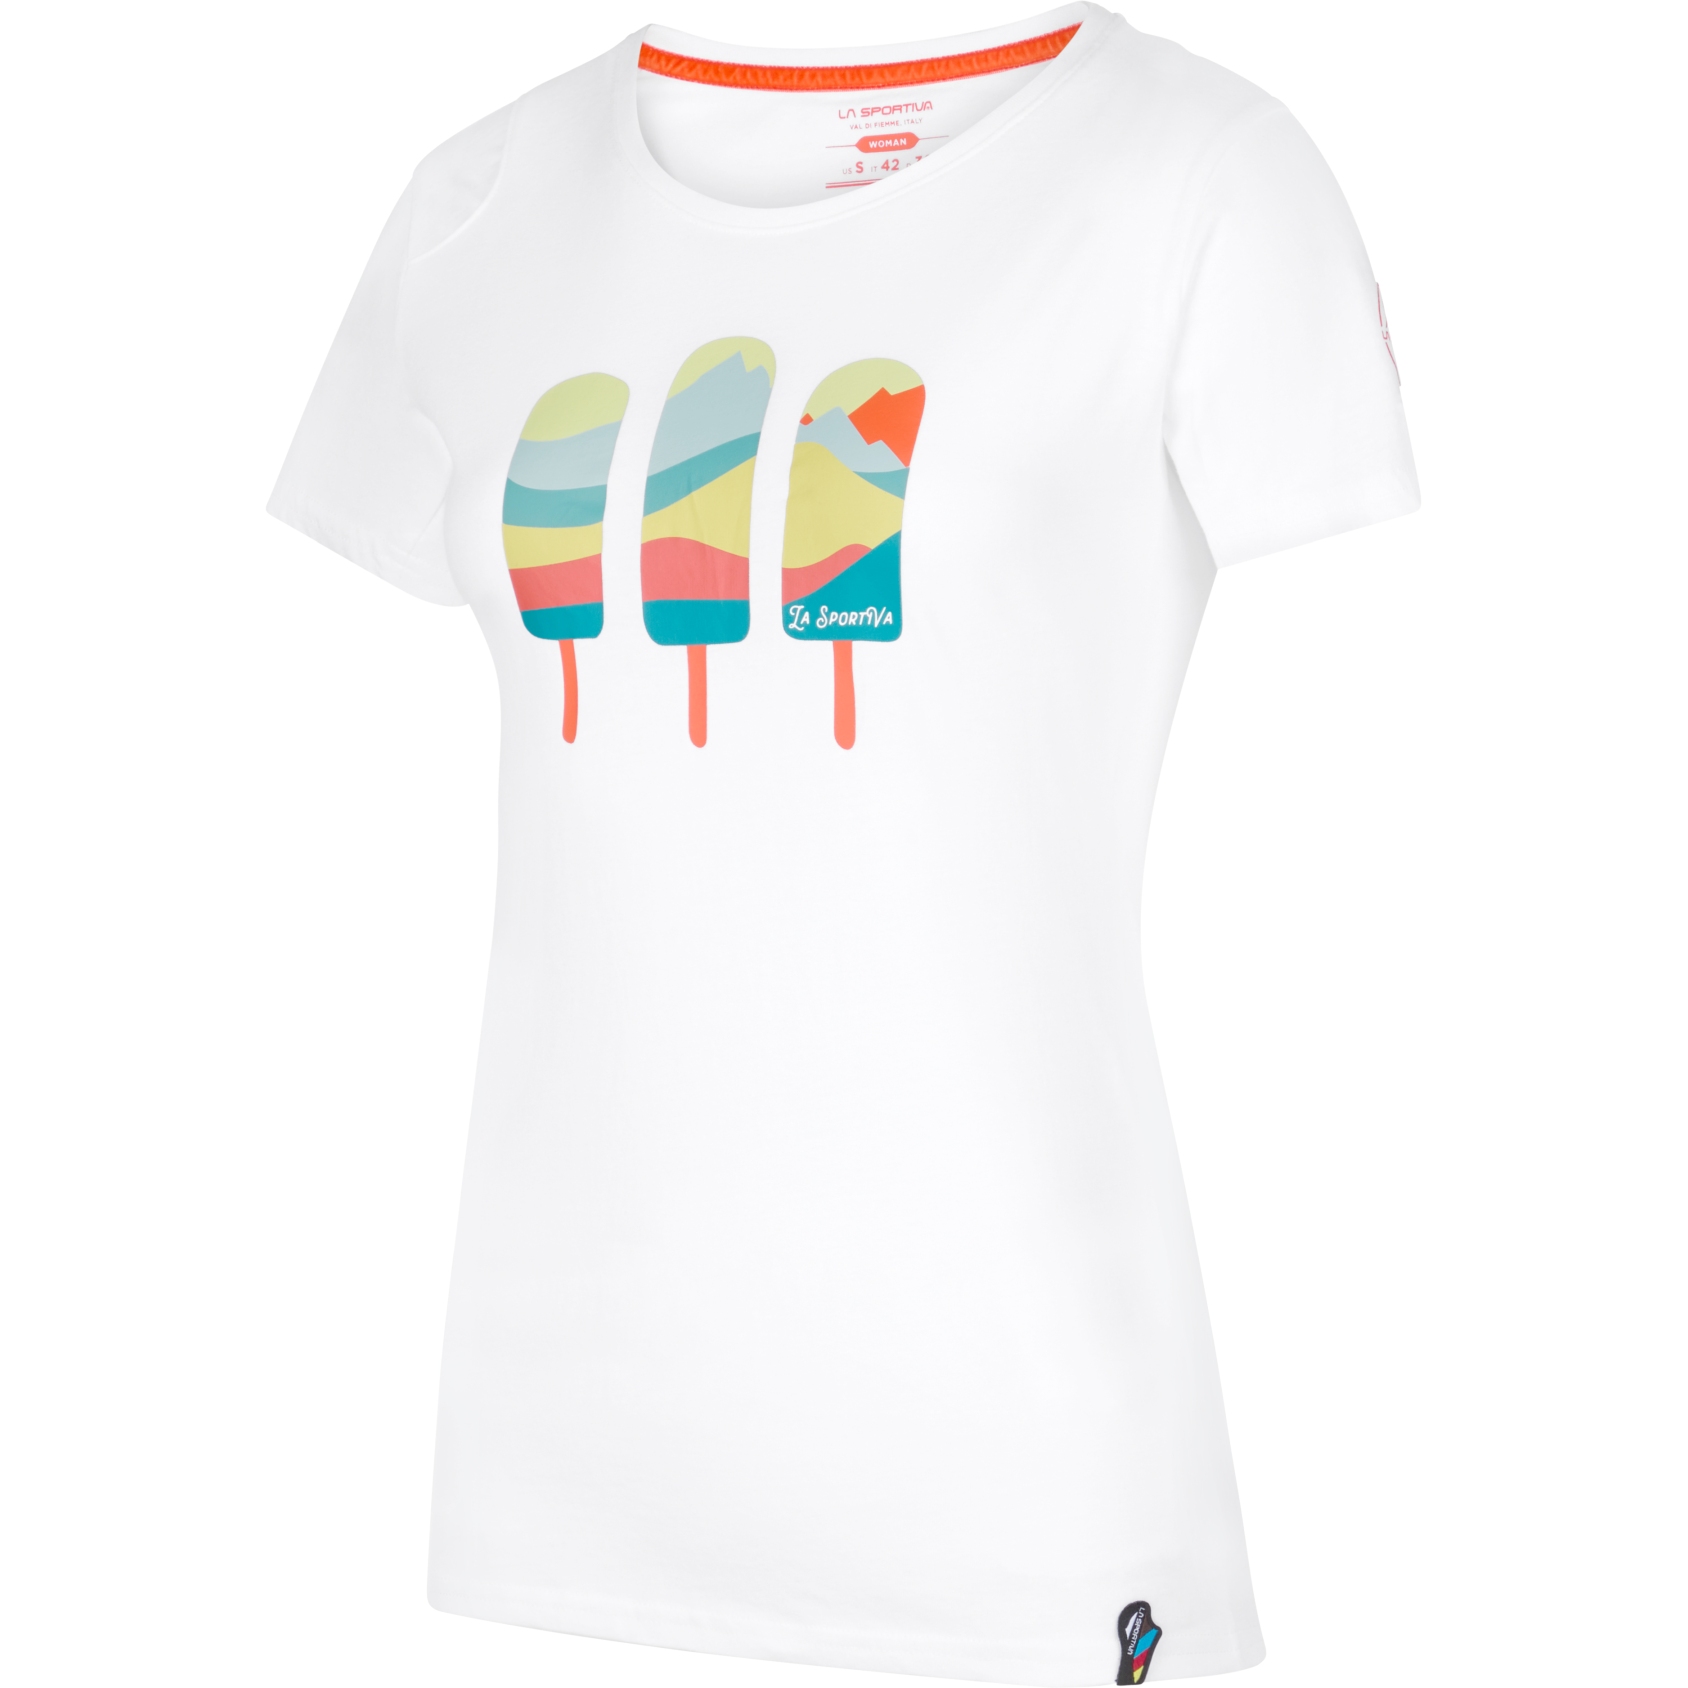 Picture of La Sportiva Icy Mountains T-Shirt Women - White